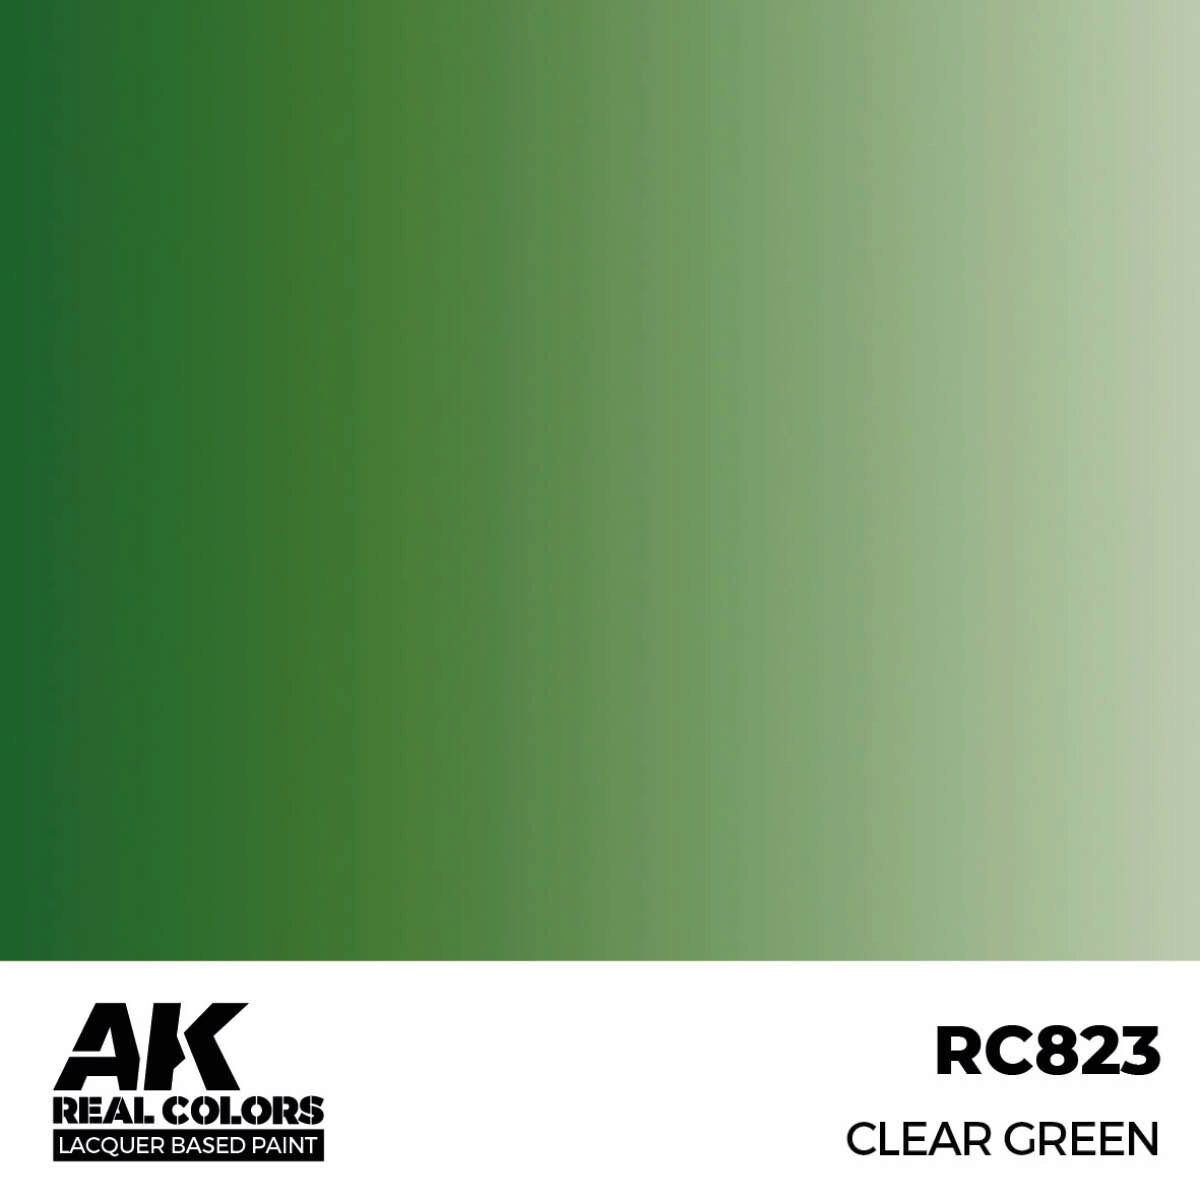 AK RC823 Real Colors Clear Green 17 ml.